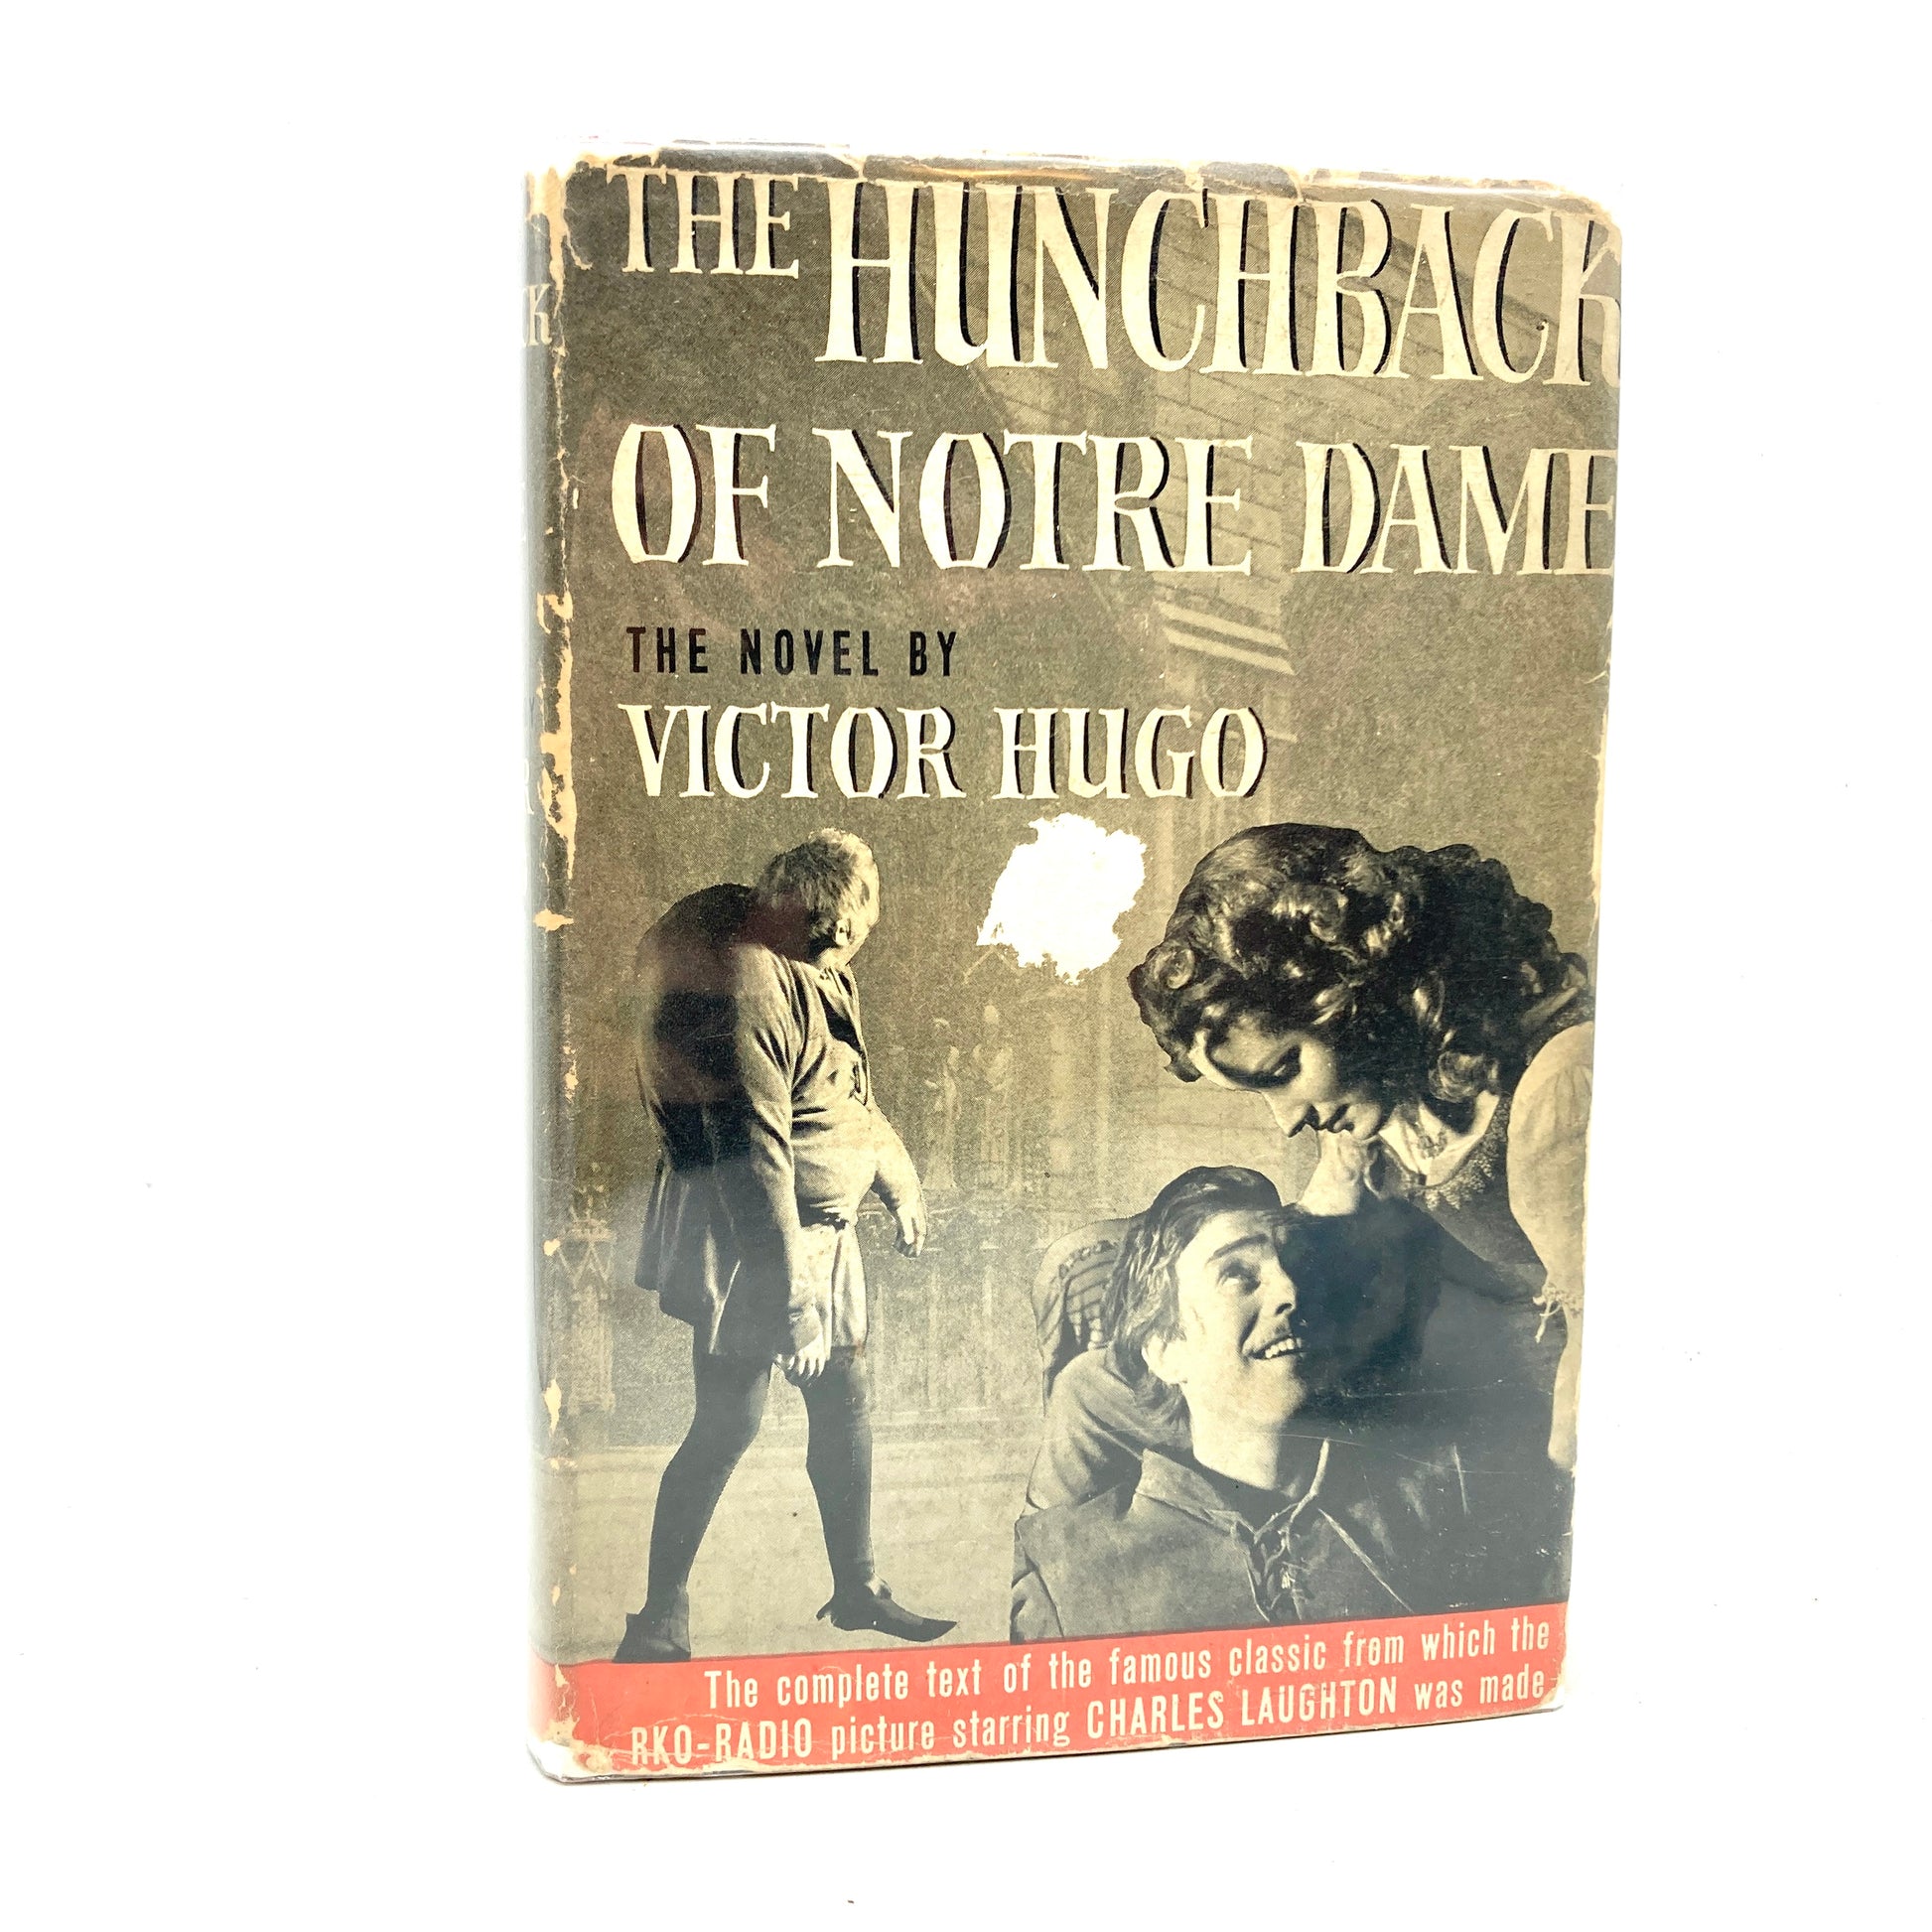 HUGO, Victor "The Hunchback of Notre Dame" [Triangle Books, 1940] - Buzz Bookstore